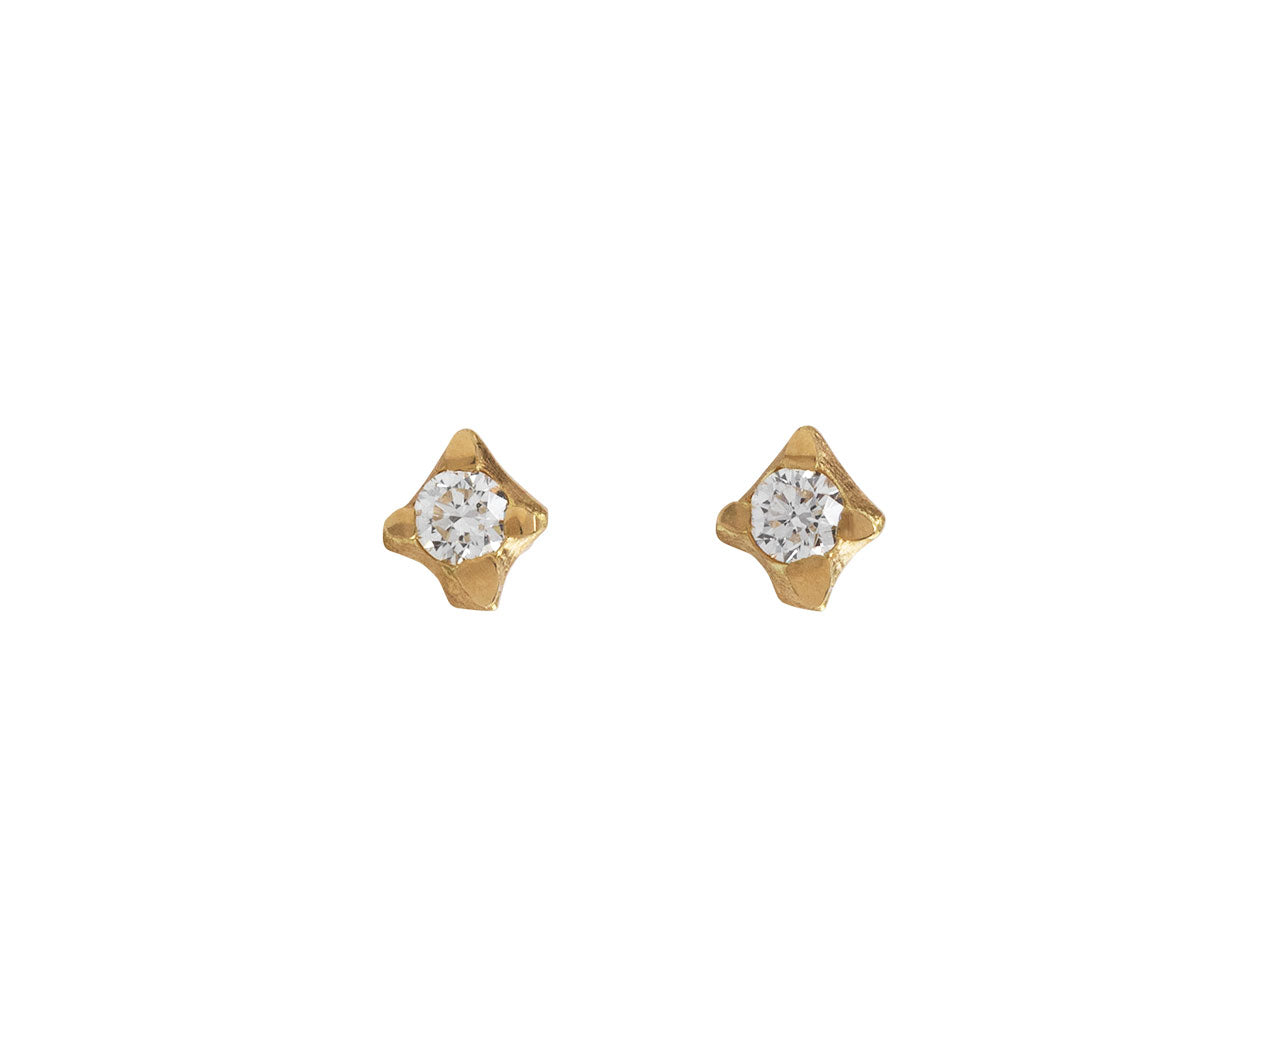 6mm Crystal Stud Earrings | Local Eclectic – local eclectic